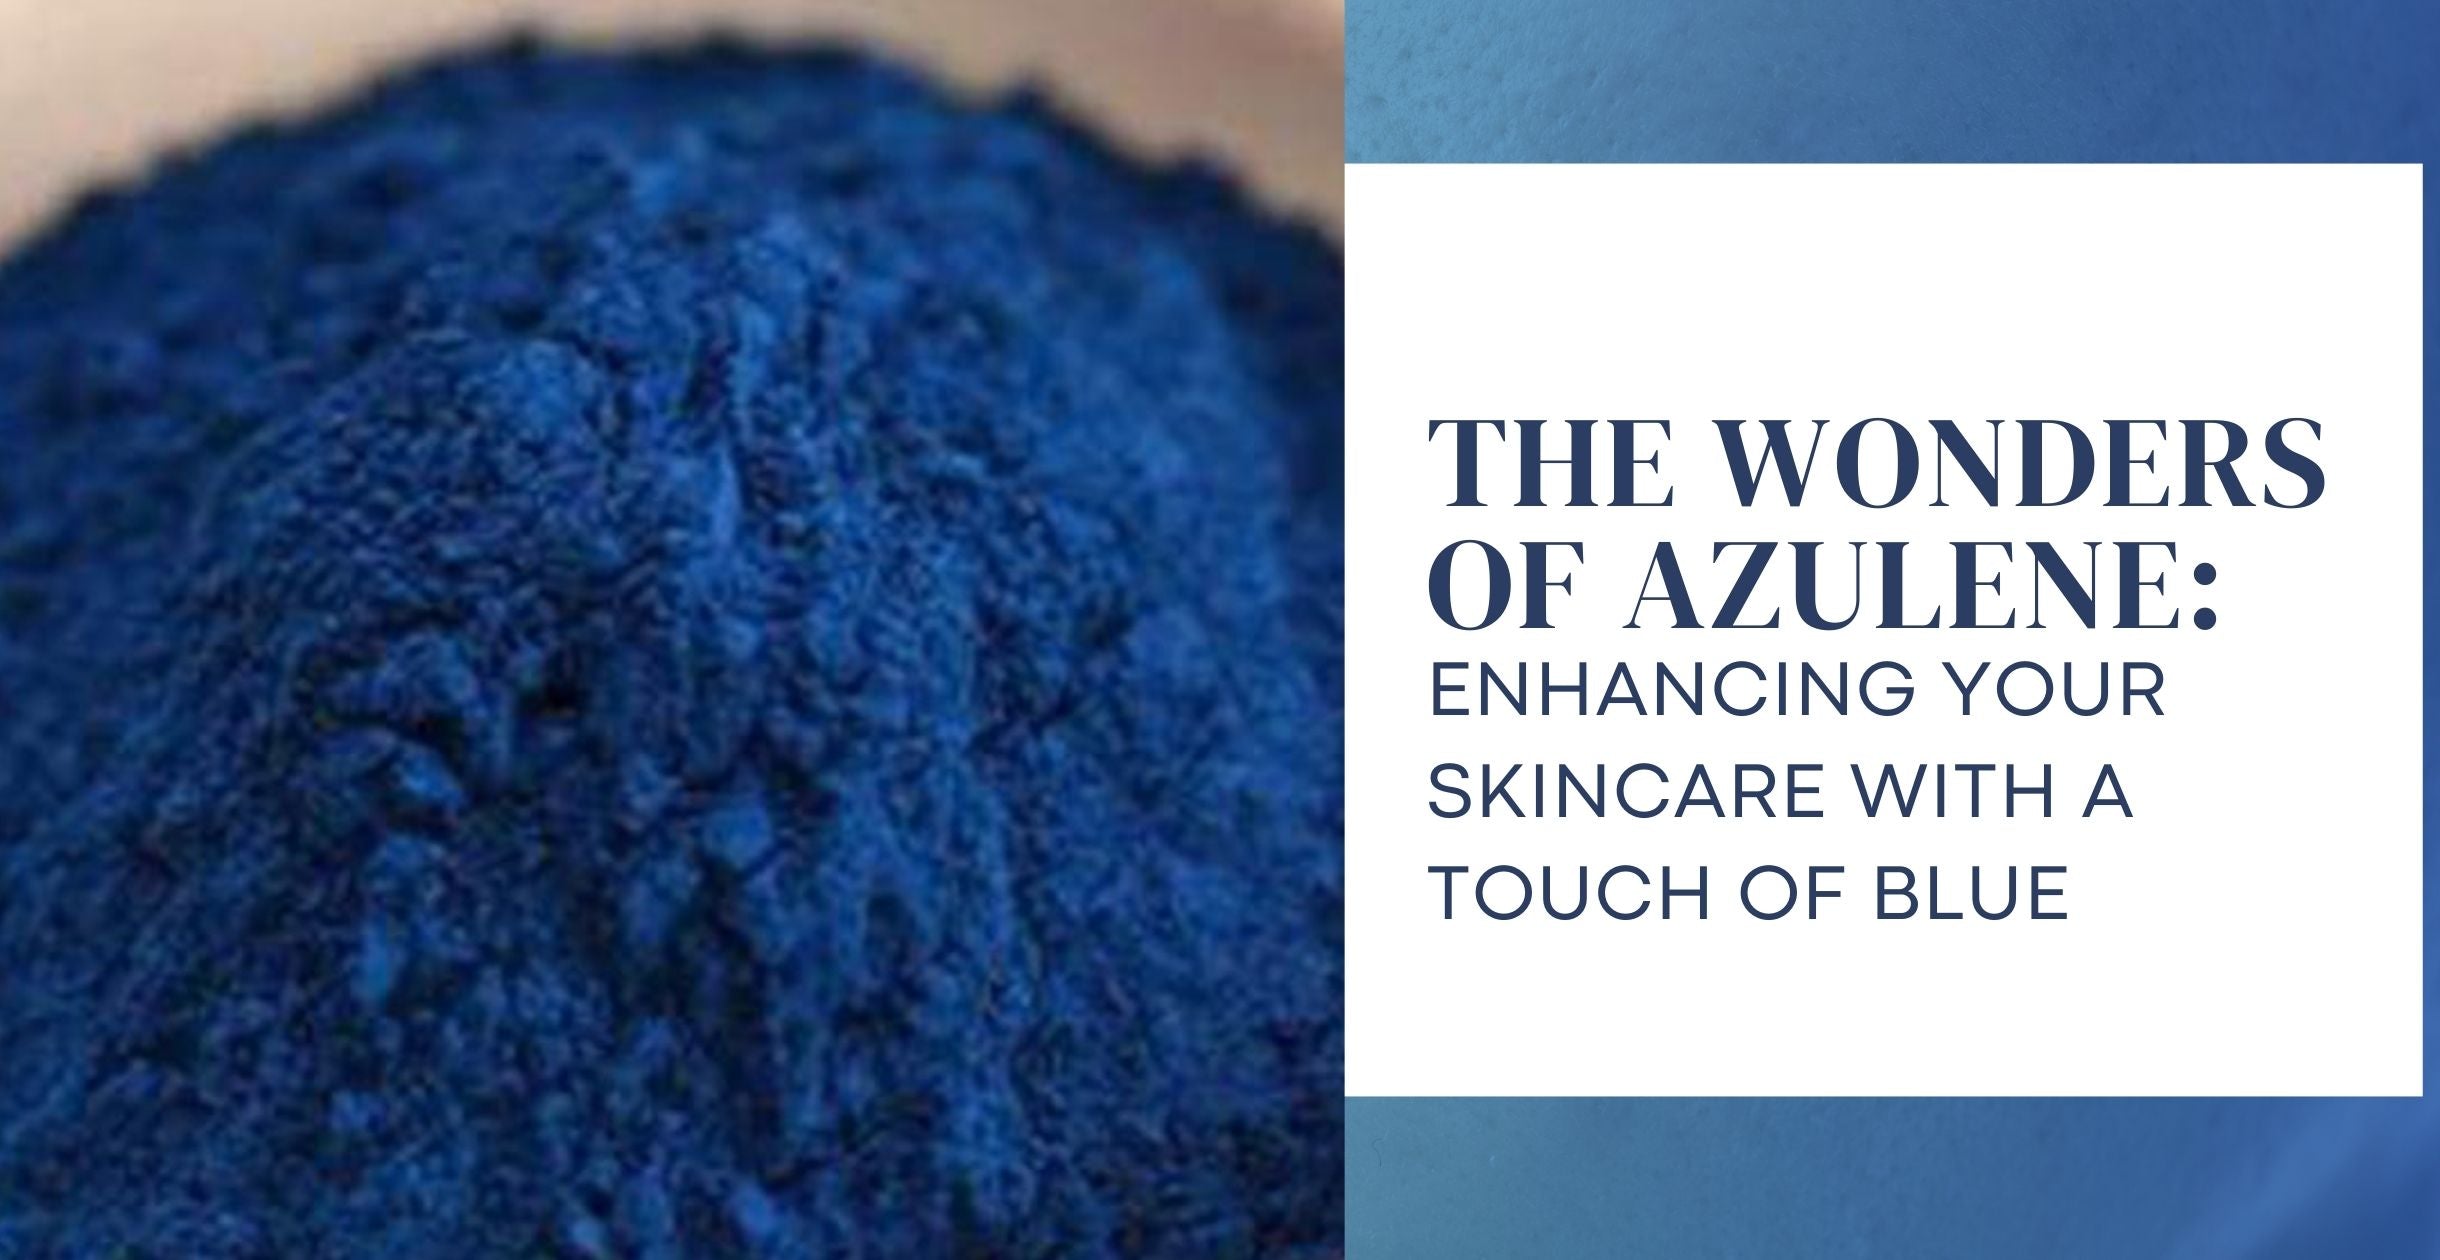 The Wonders of Azulene: Enhancing Your Skincare with a Touch of Blue